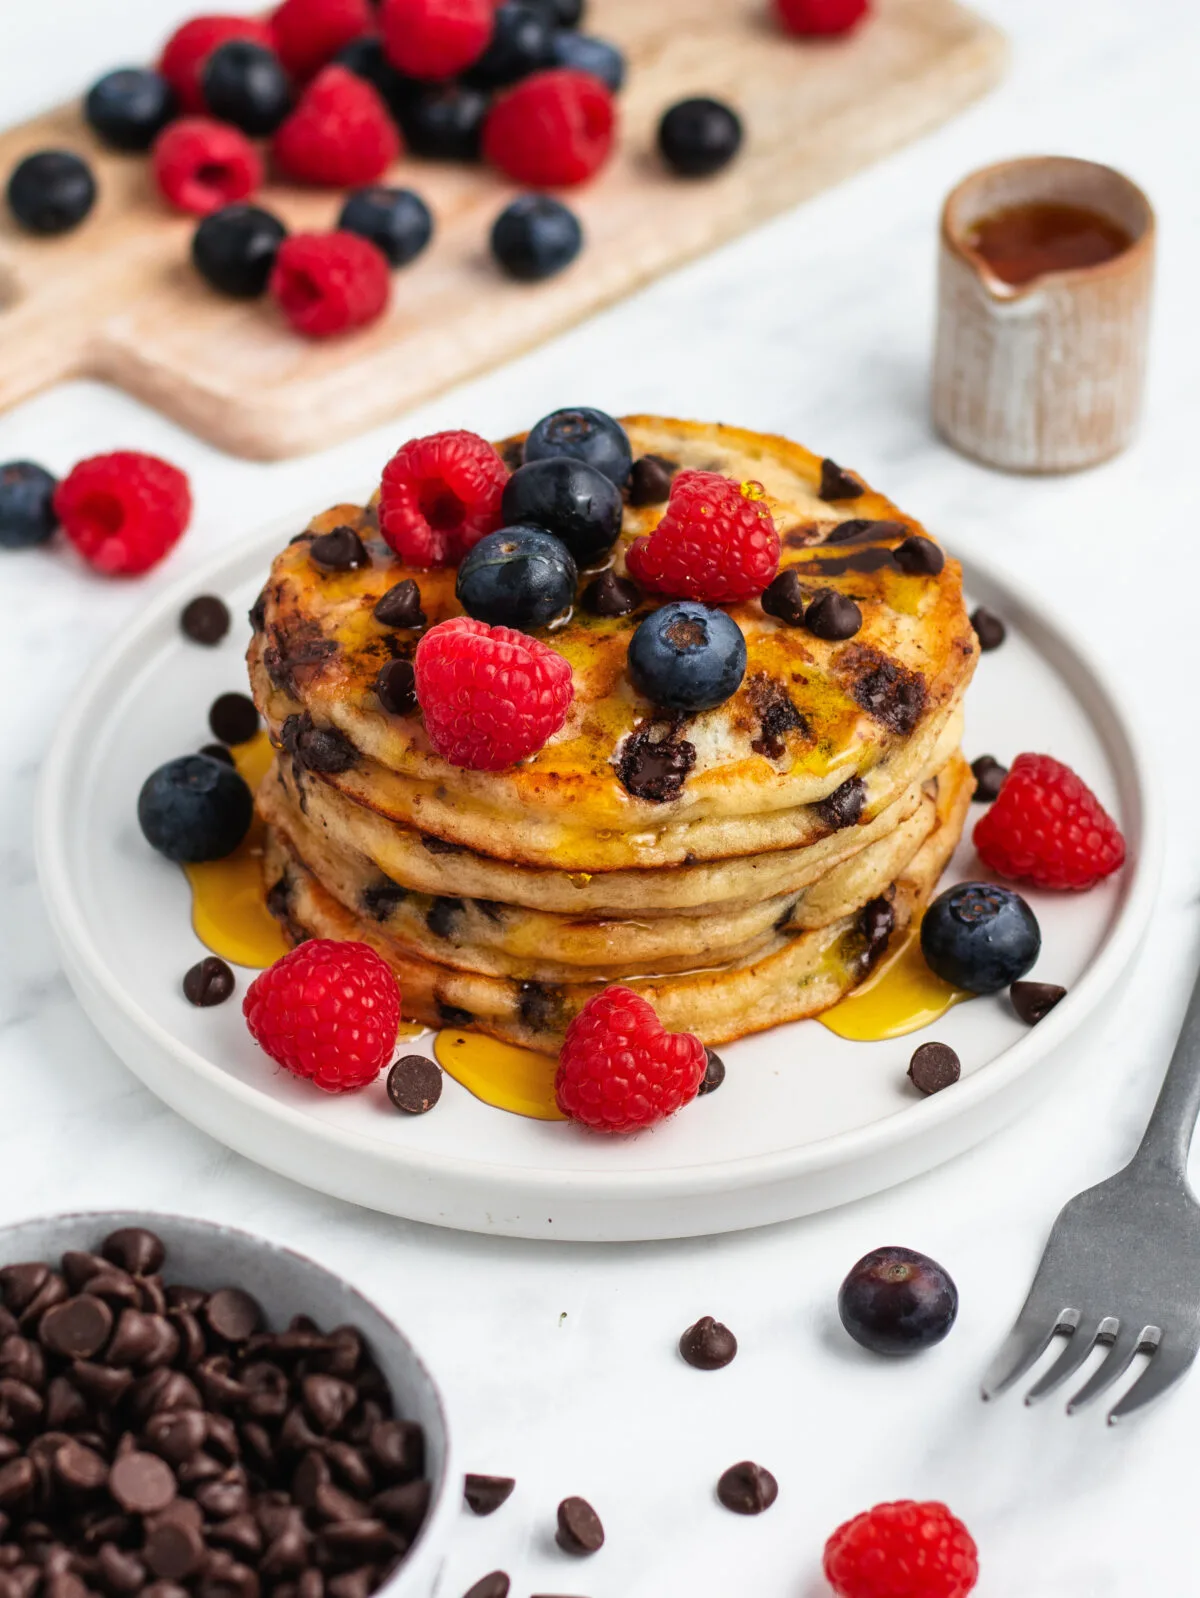 The best chocolate chip pancakes recipe ever! Made with buttermilk, these pancakes are soft and fluffy! Add berries for extra flavour!